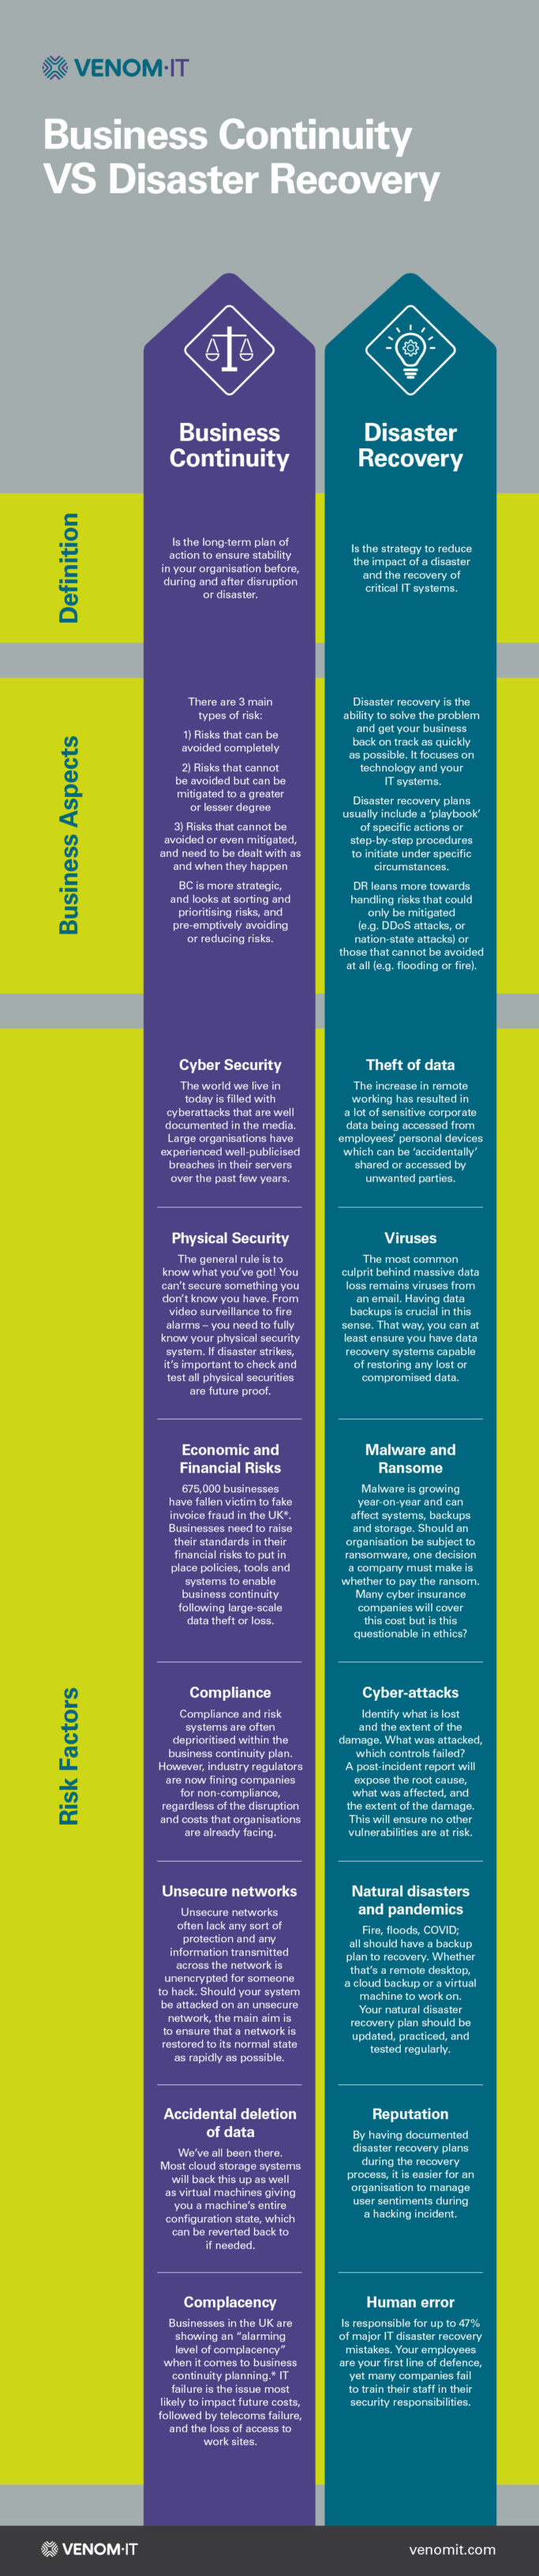 Infographic: A Comparison of Business Continuity & Disaster Recovery